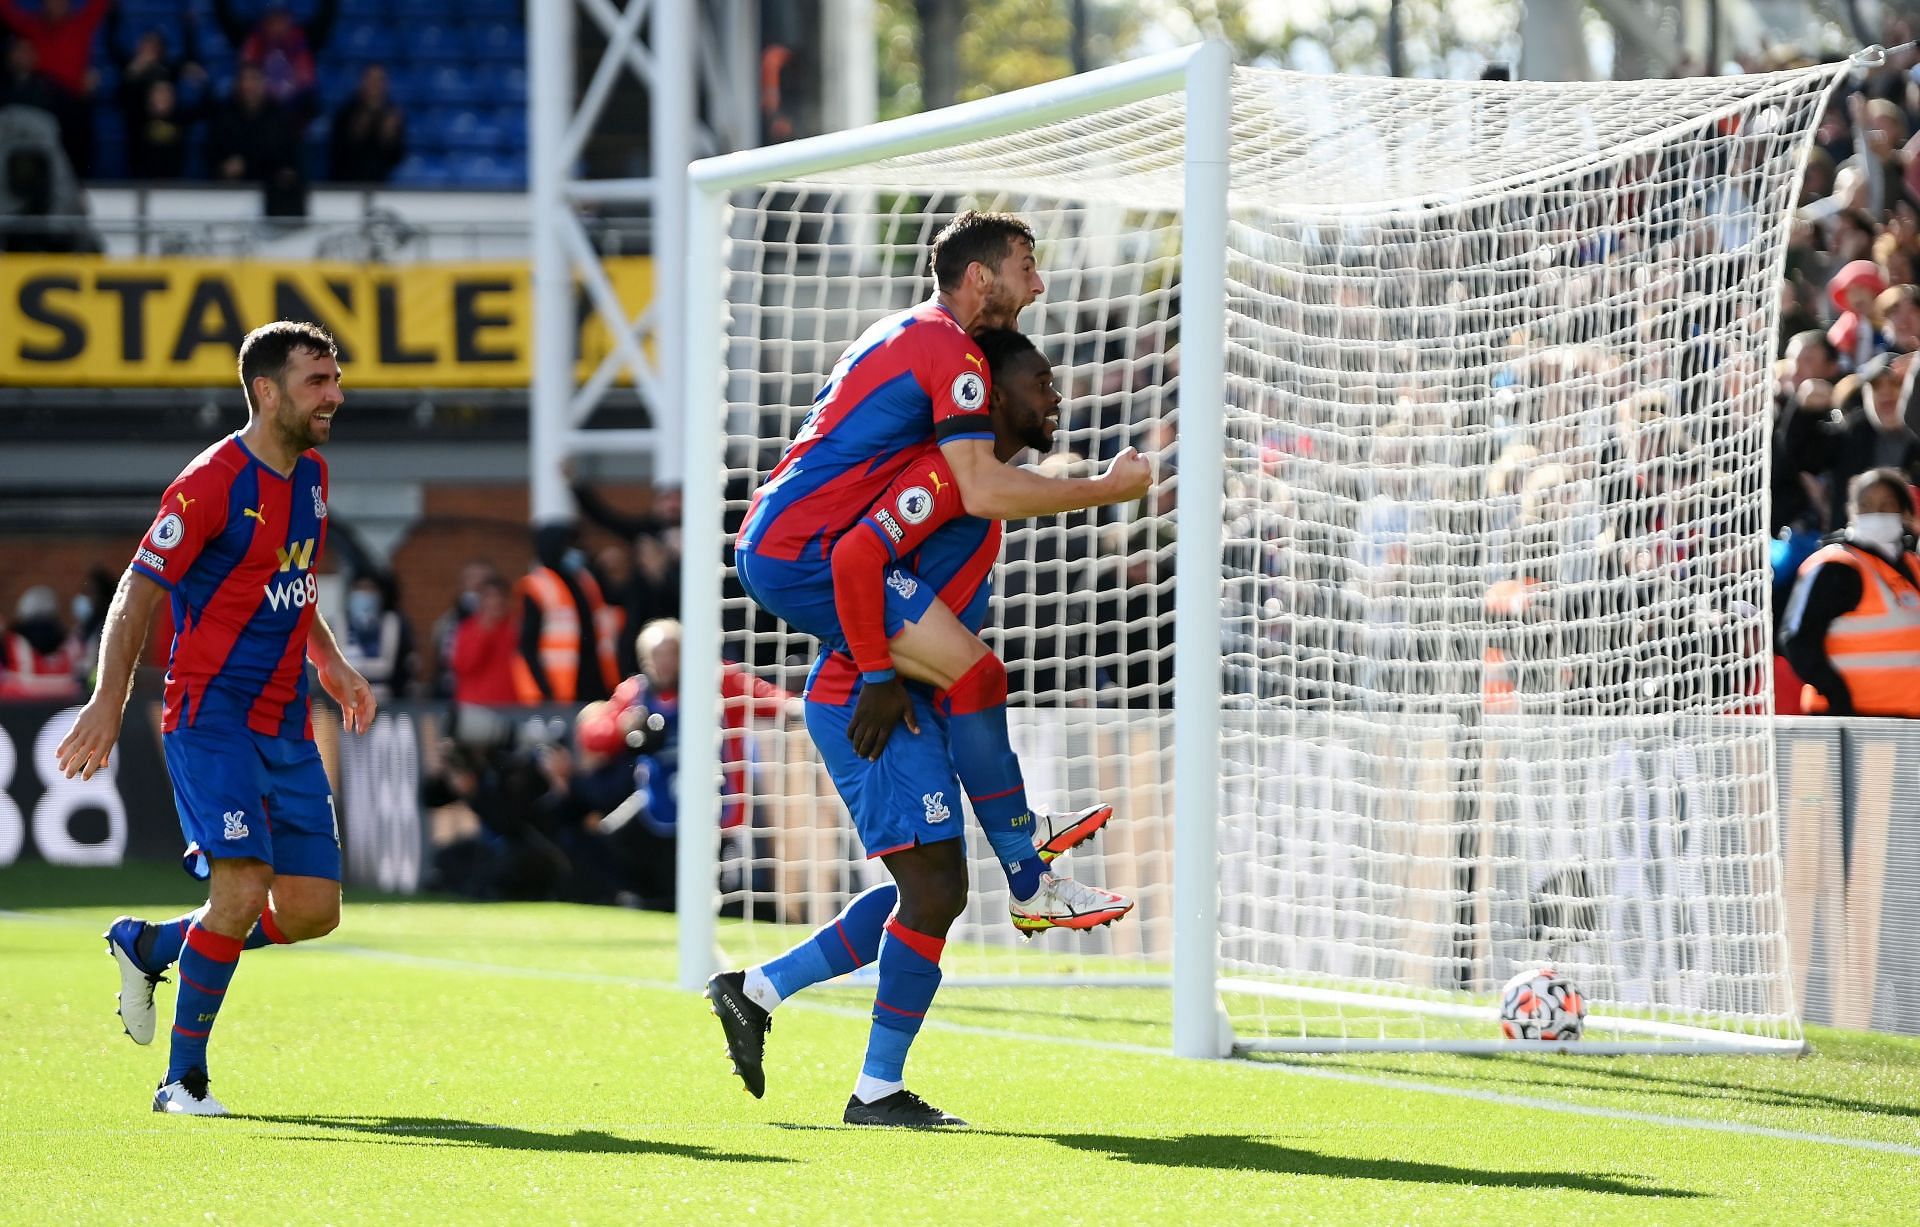 Crystal Palace have been regulars in the Premier League in the last few years.